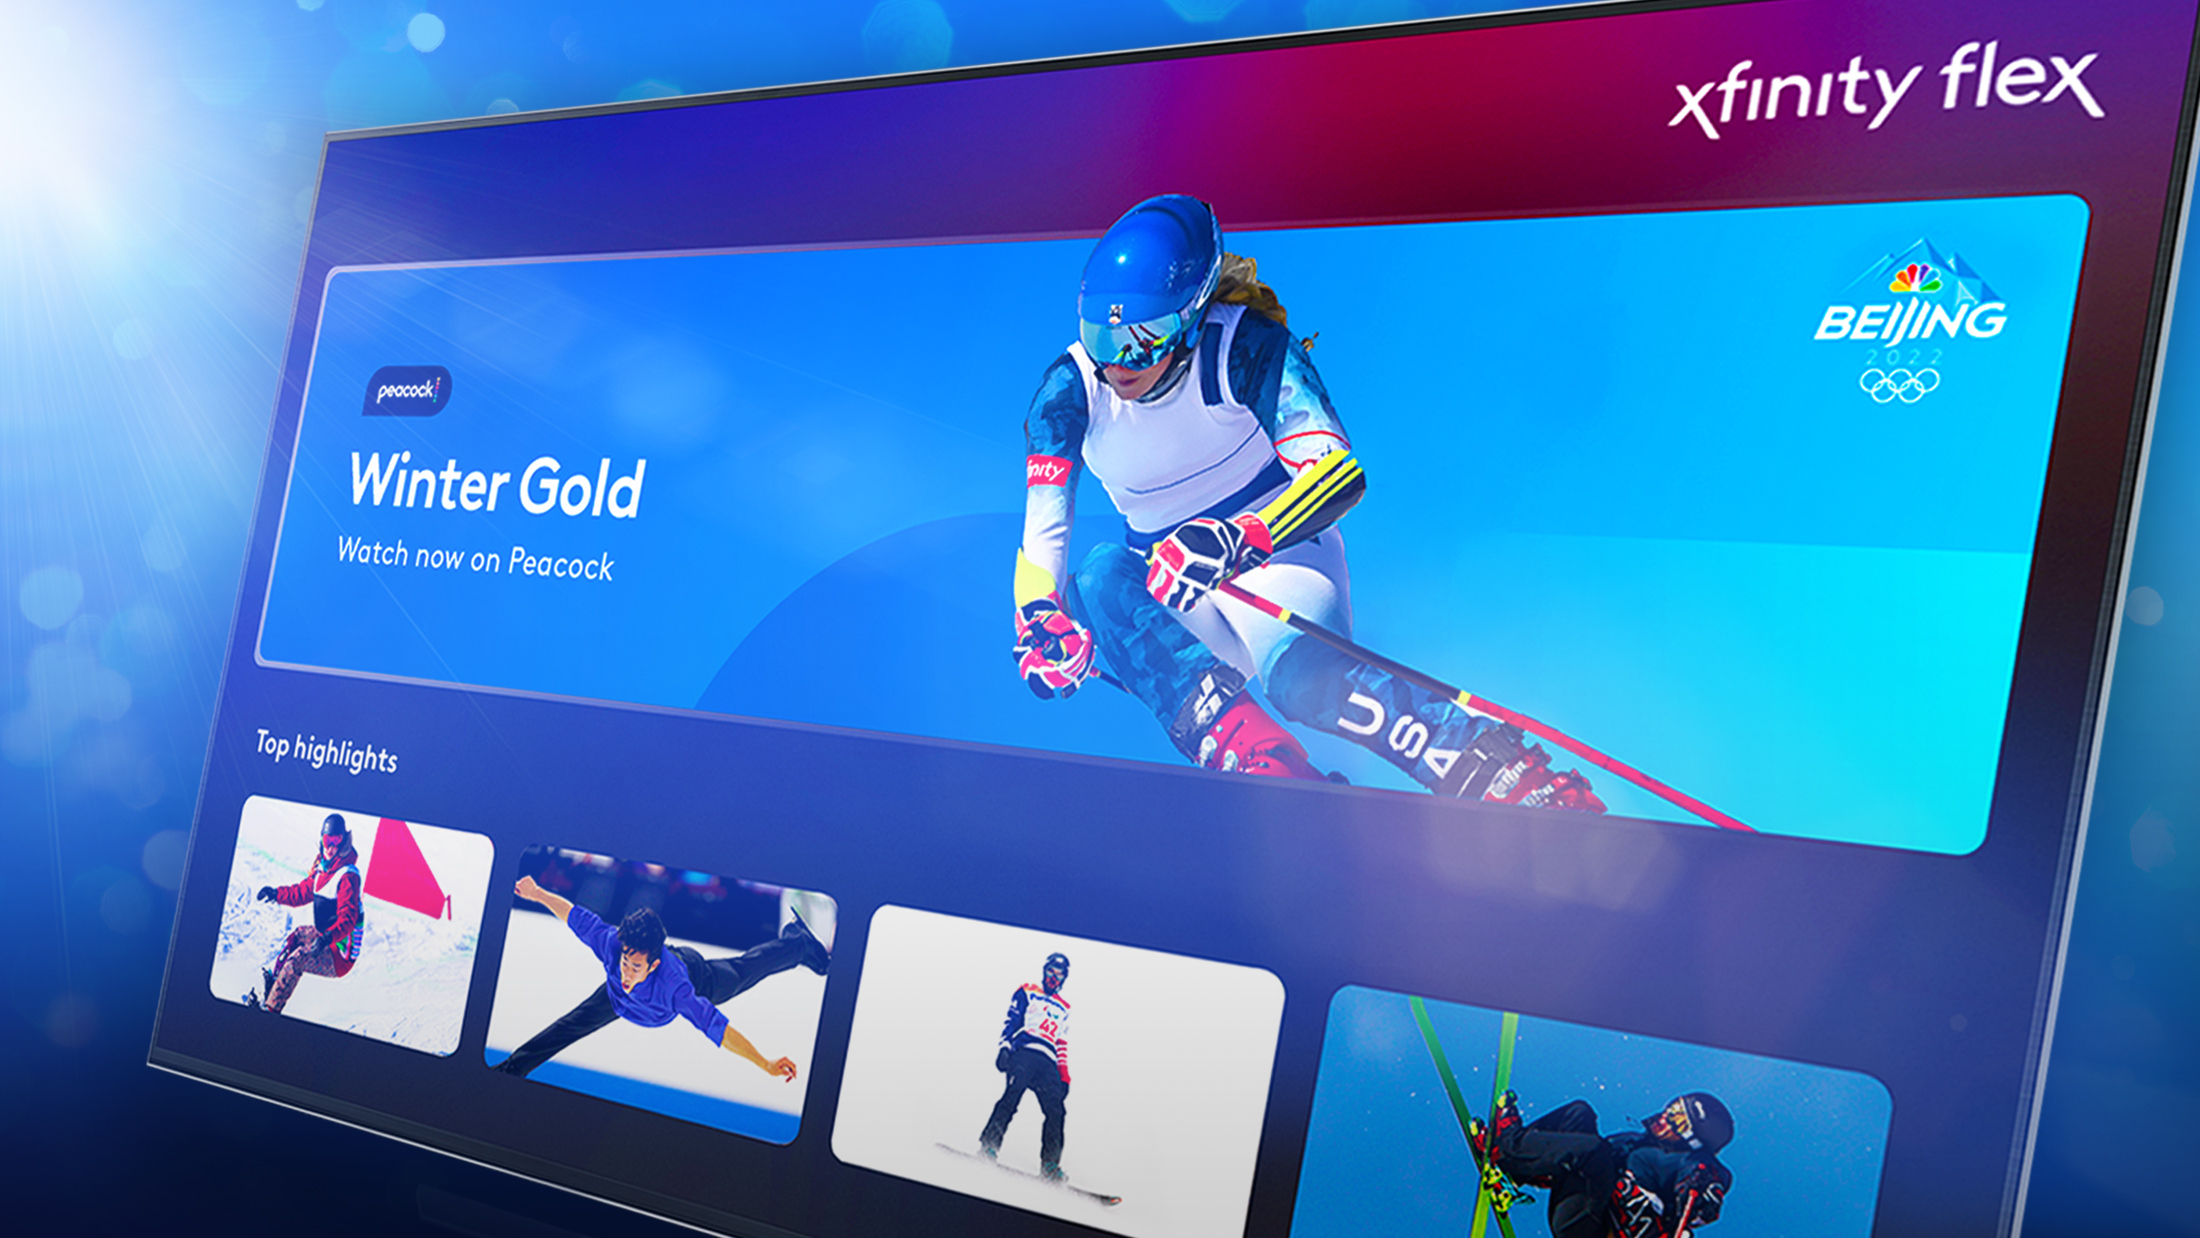 Beijing 2022 Comcast To Present 2022 Winter Olympics Through Simplified Content Hub Across All Platforms